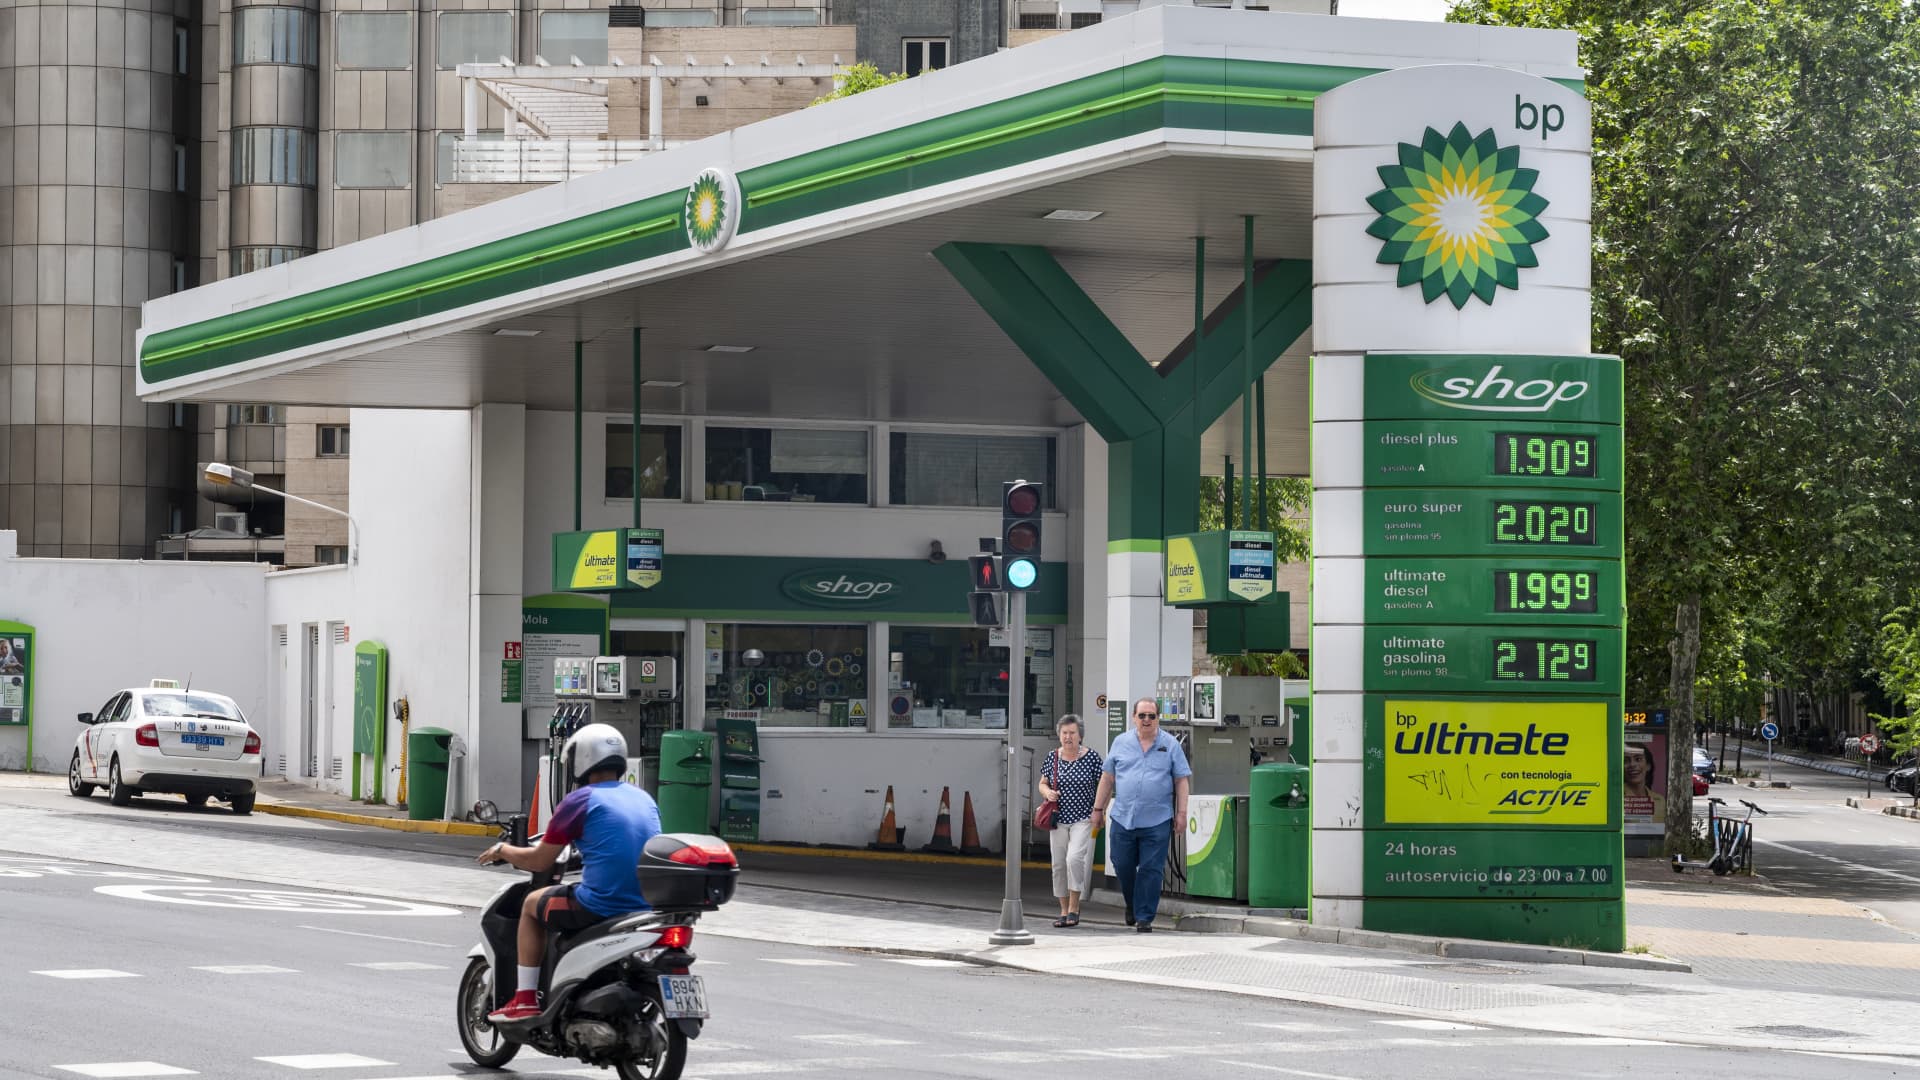 A BP gas station in Madrid, Spain.